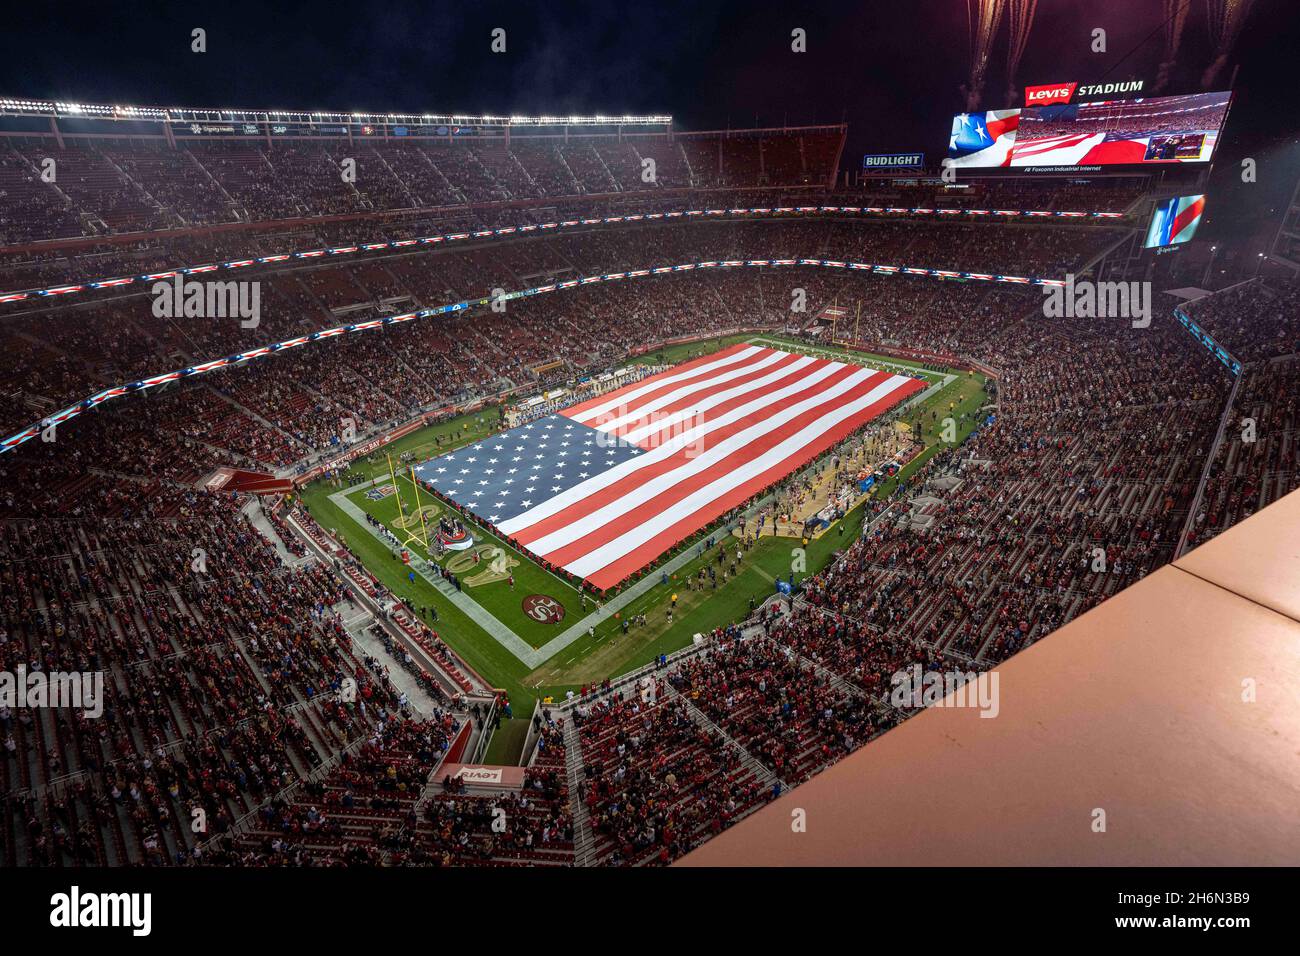 Fireworks and the flag during the National Anthem before the start of the game between San Francisco 49ers and Los Angeles Rams in San Francisco, Mond Stock Photo